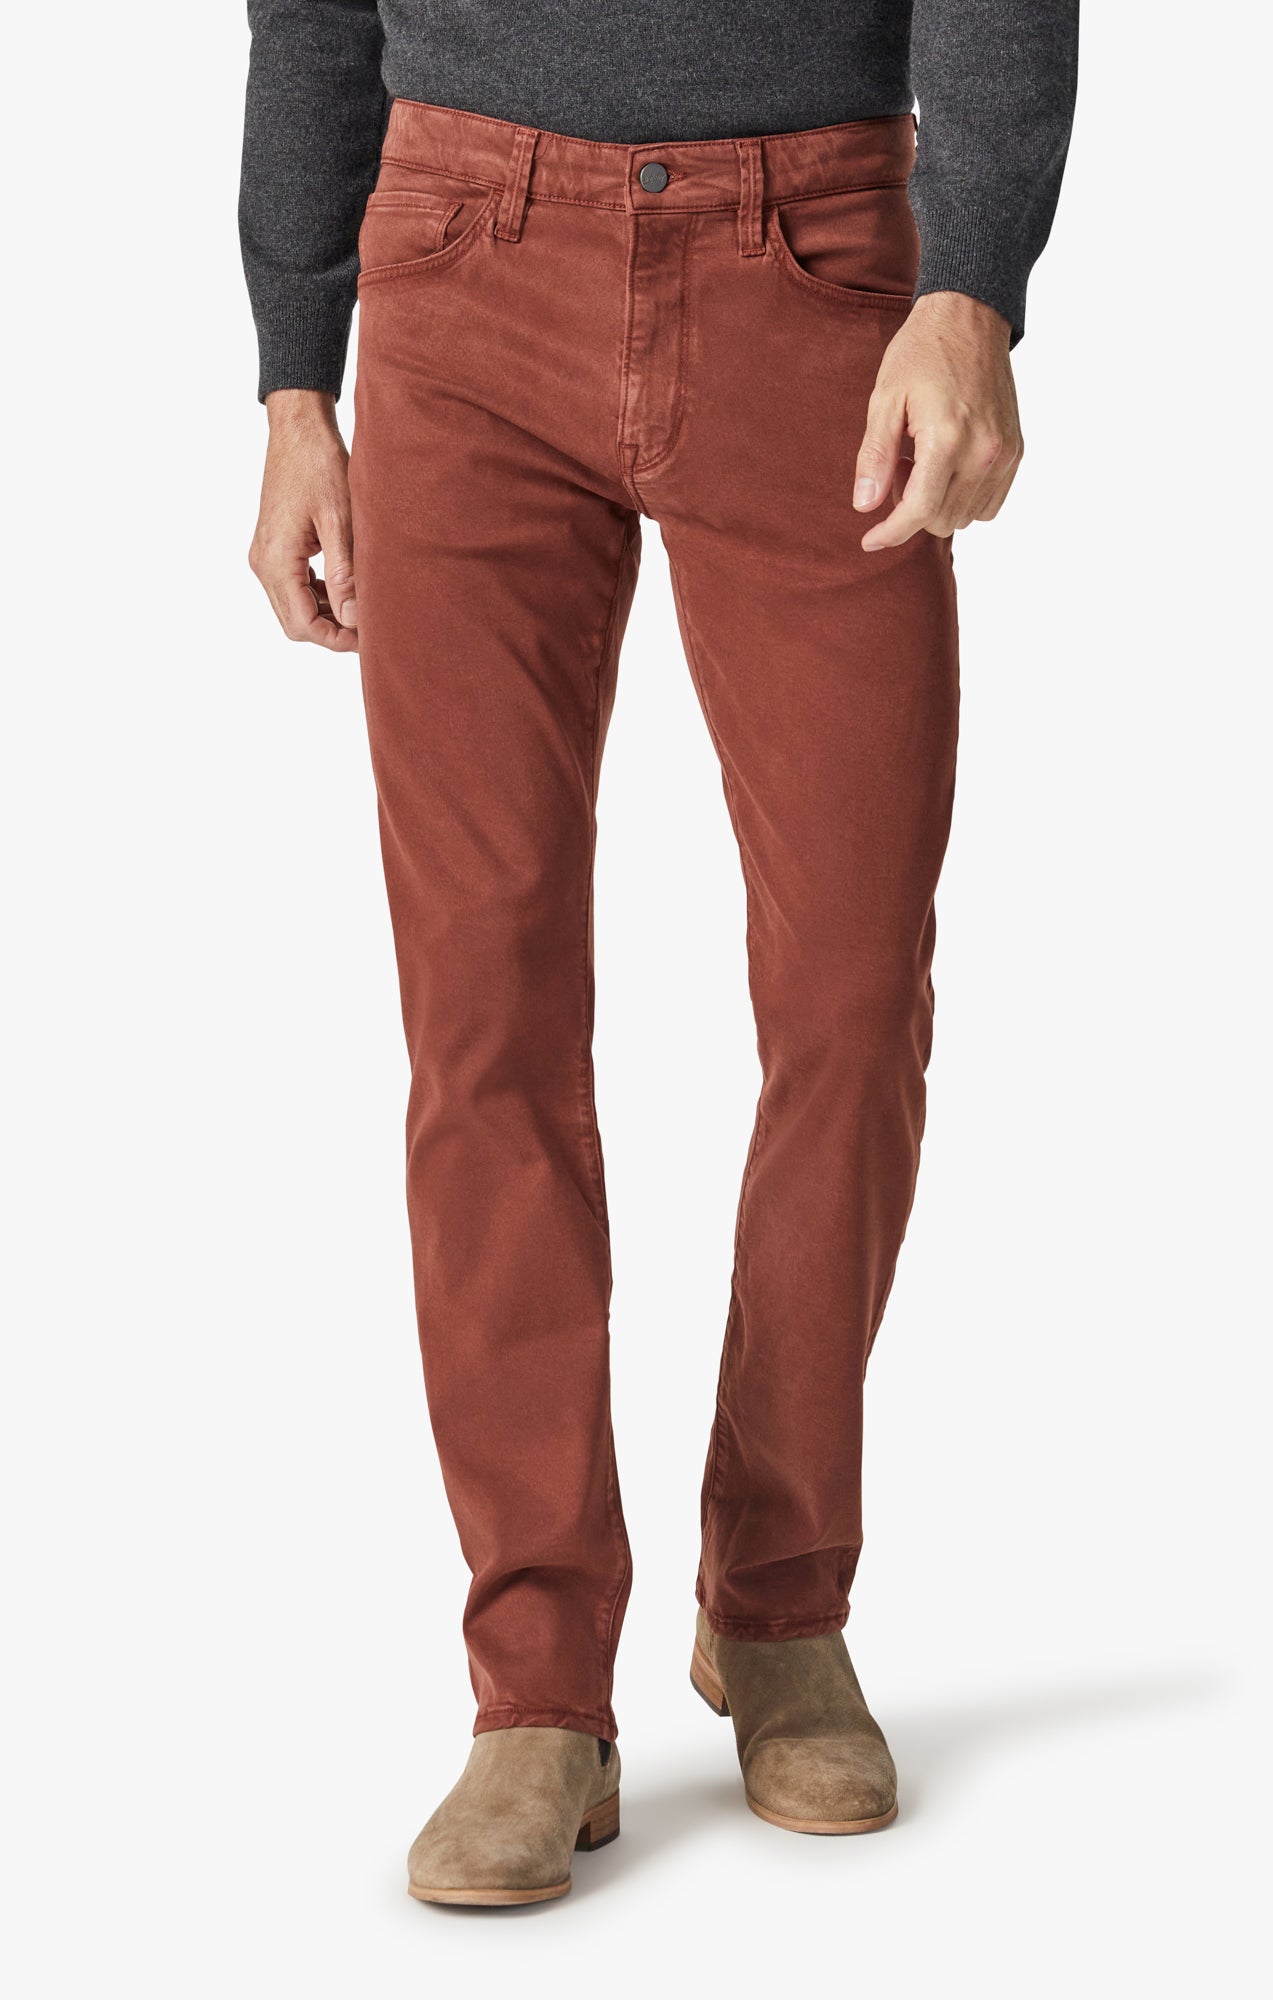 Cool Tapered Leg Pants in Cinnamon Brushed Twill Image 2